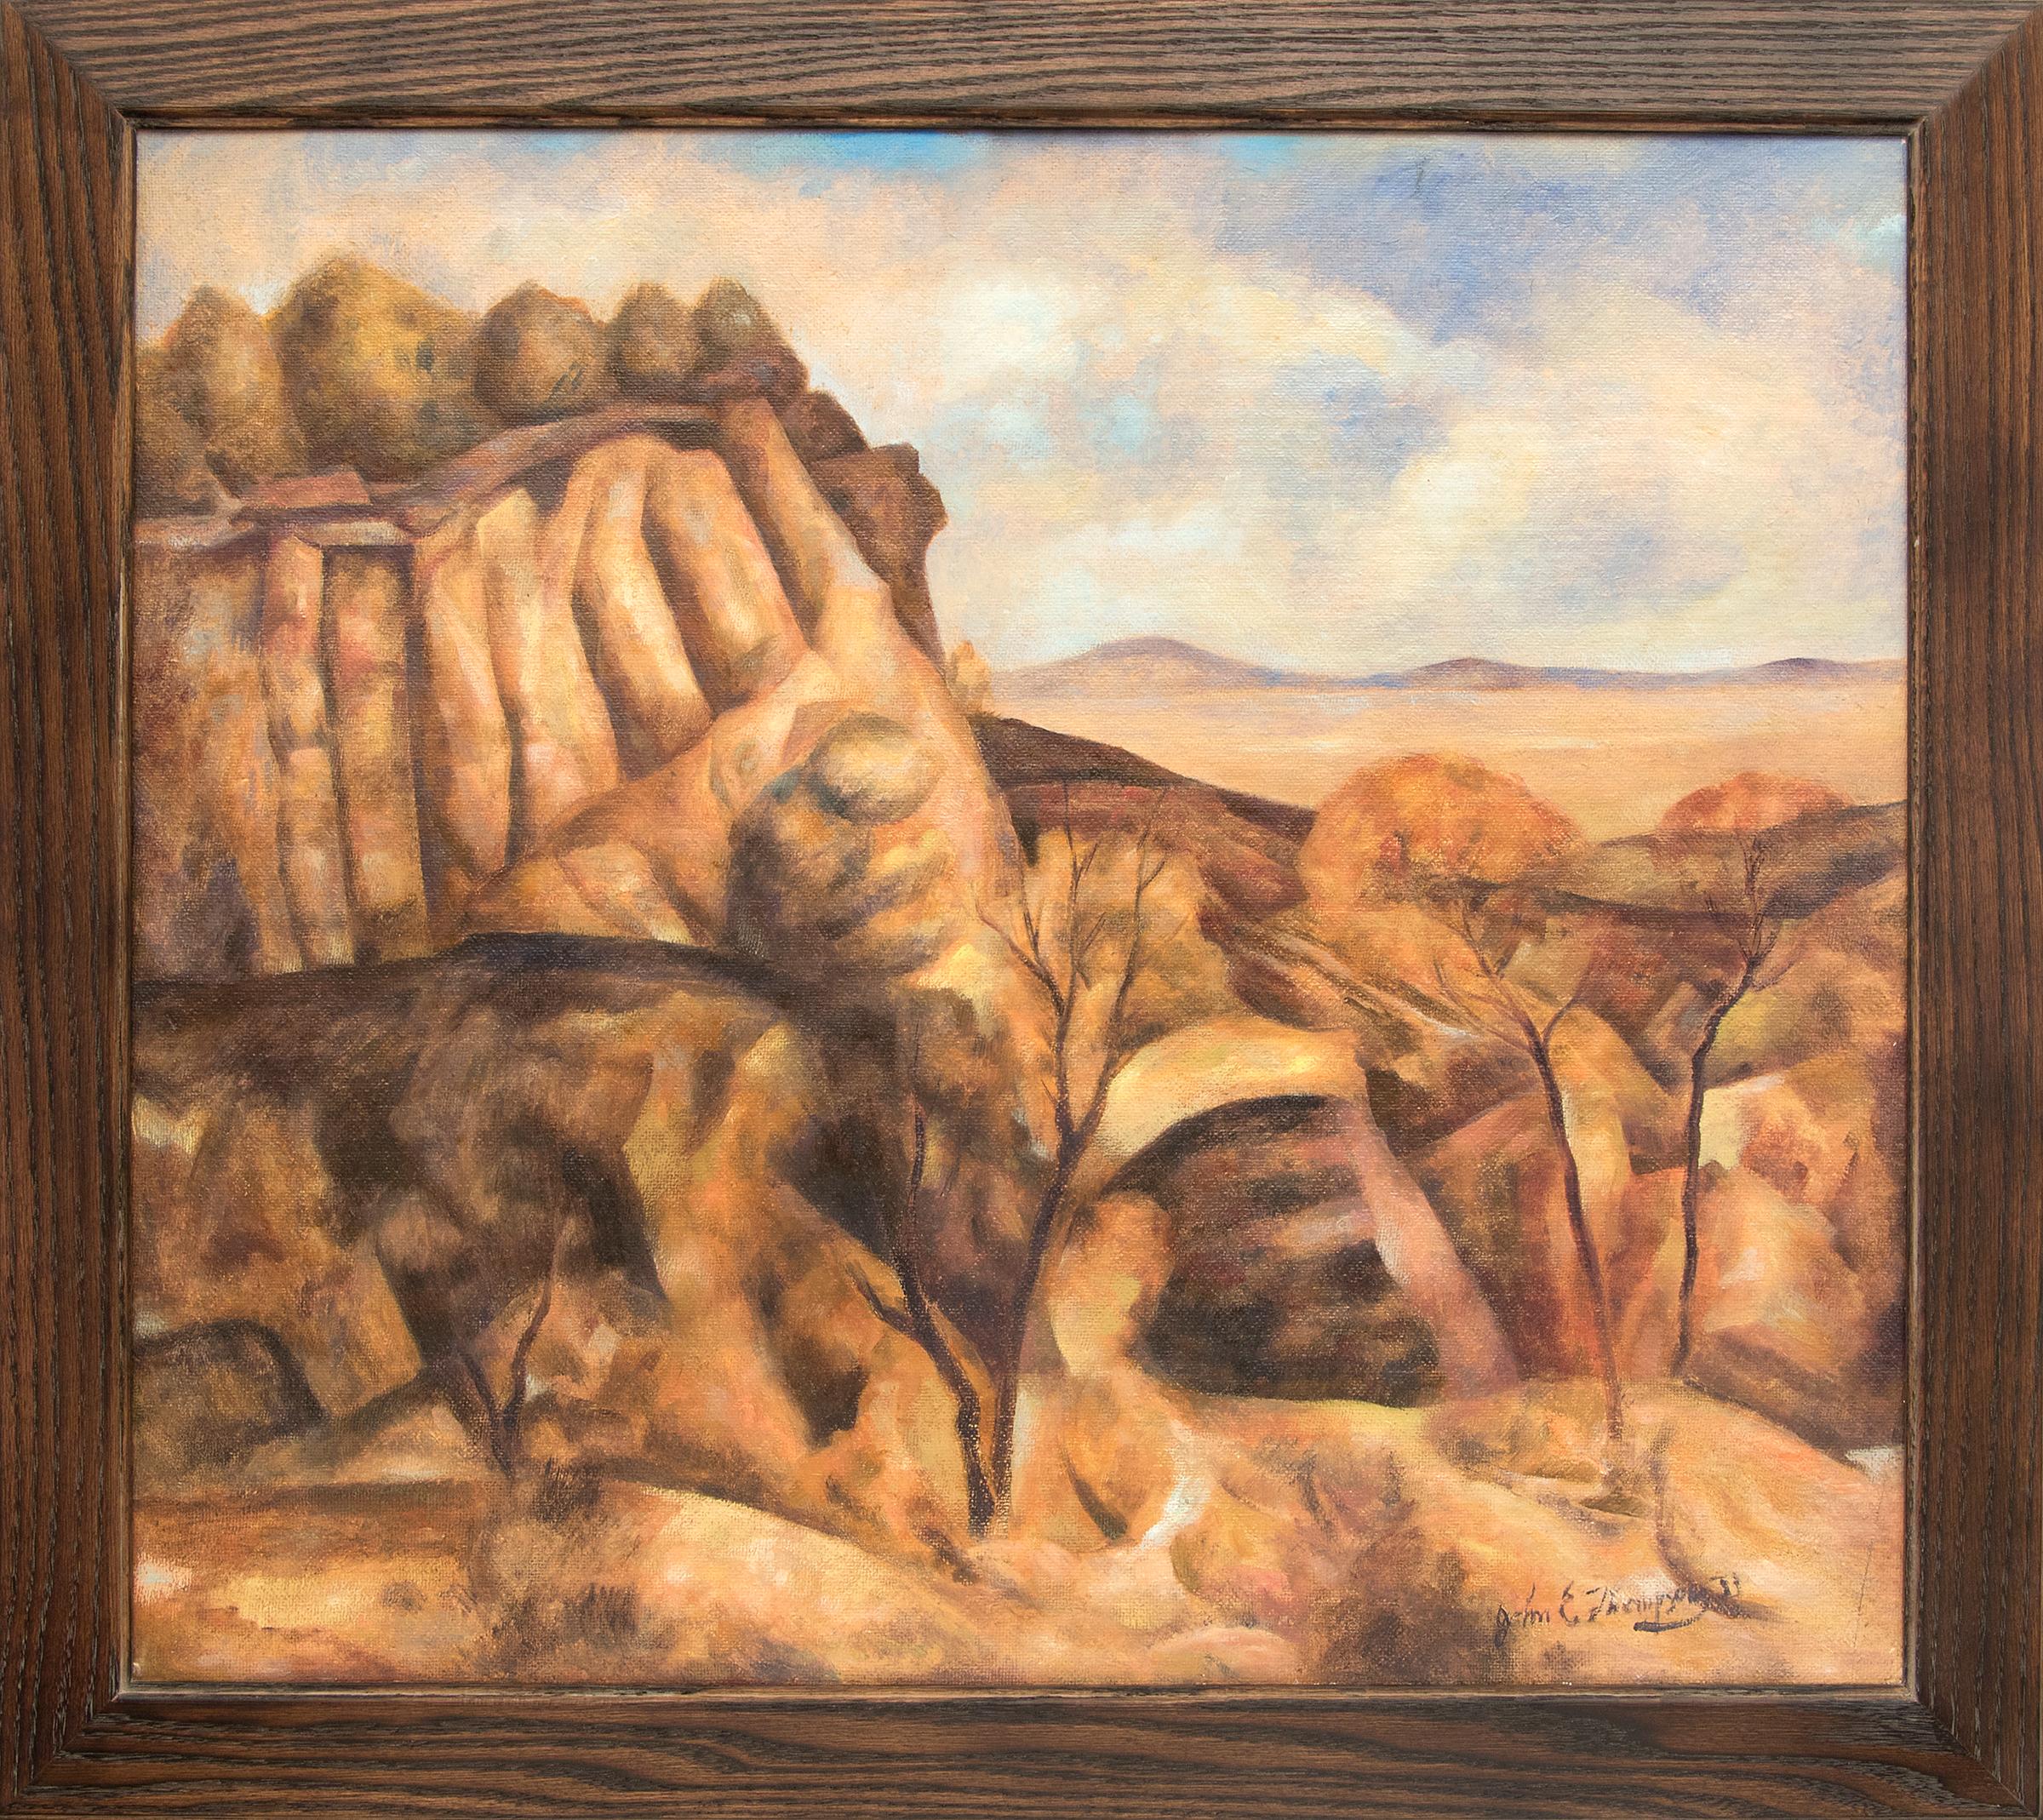 1930s Modernist Semi Abstract Oil Painting of a Colorado Mesa Landscape